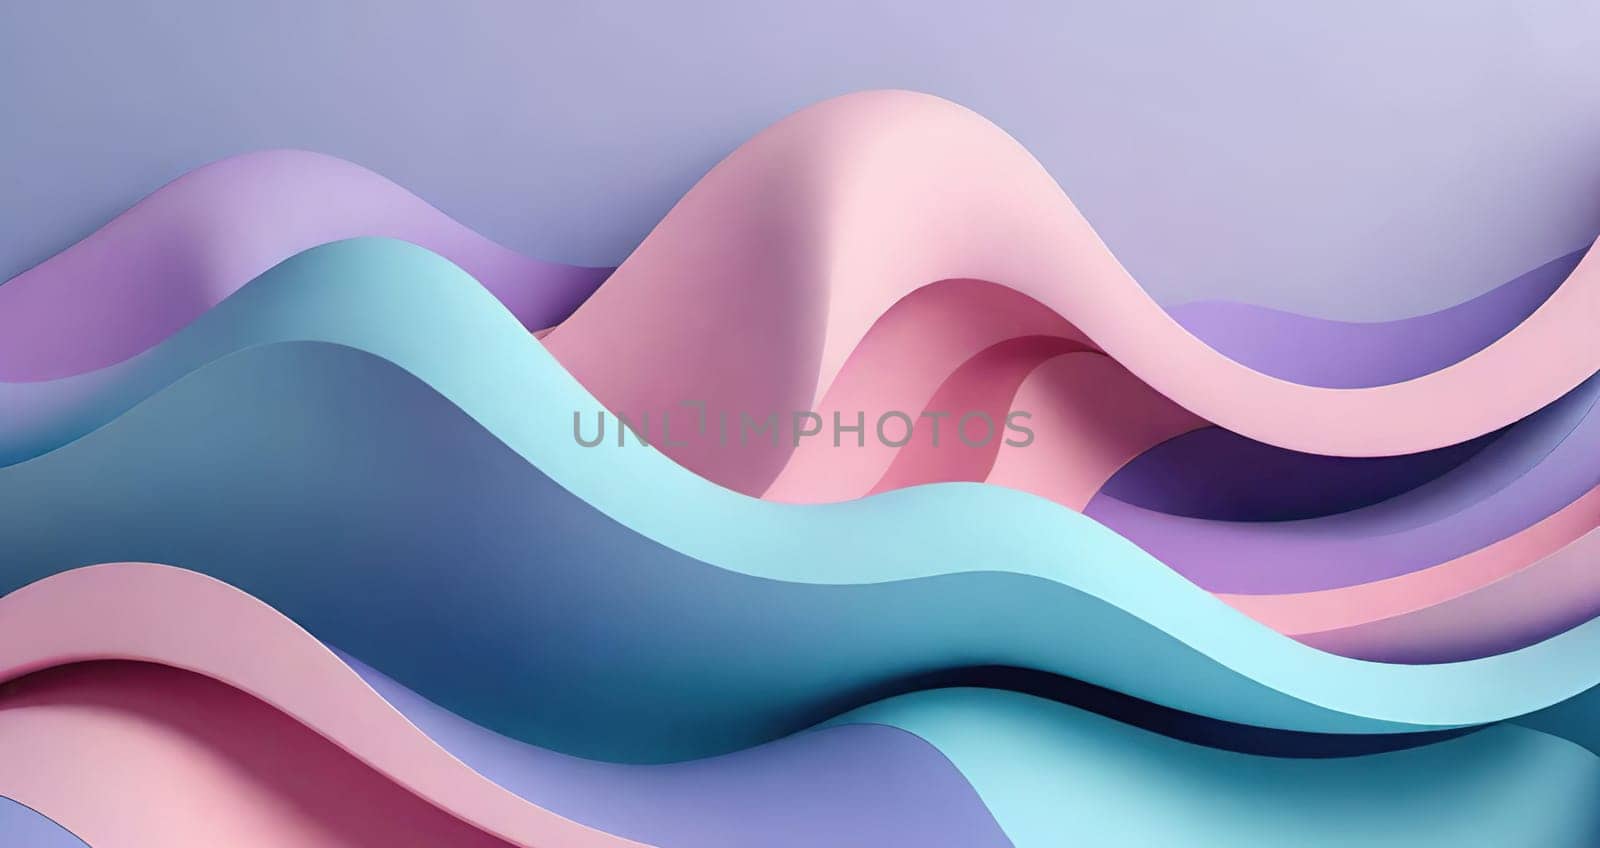 Abstract background with wavy pattern. Vector illustration.Abstract 3D rendering of paper cut waves. Colorful background with cut out shapes. Futuristic technology style.Abstract background with wavy lines.